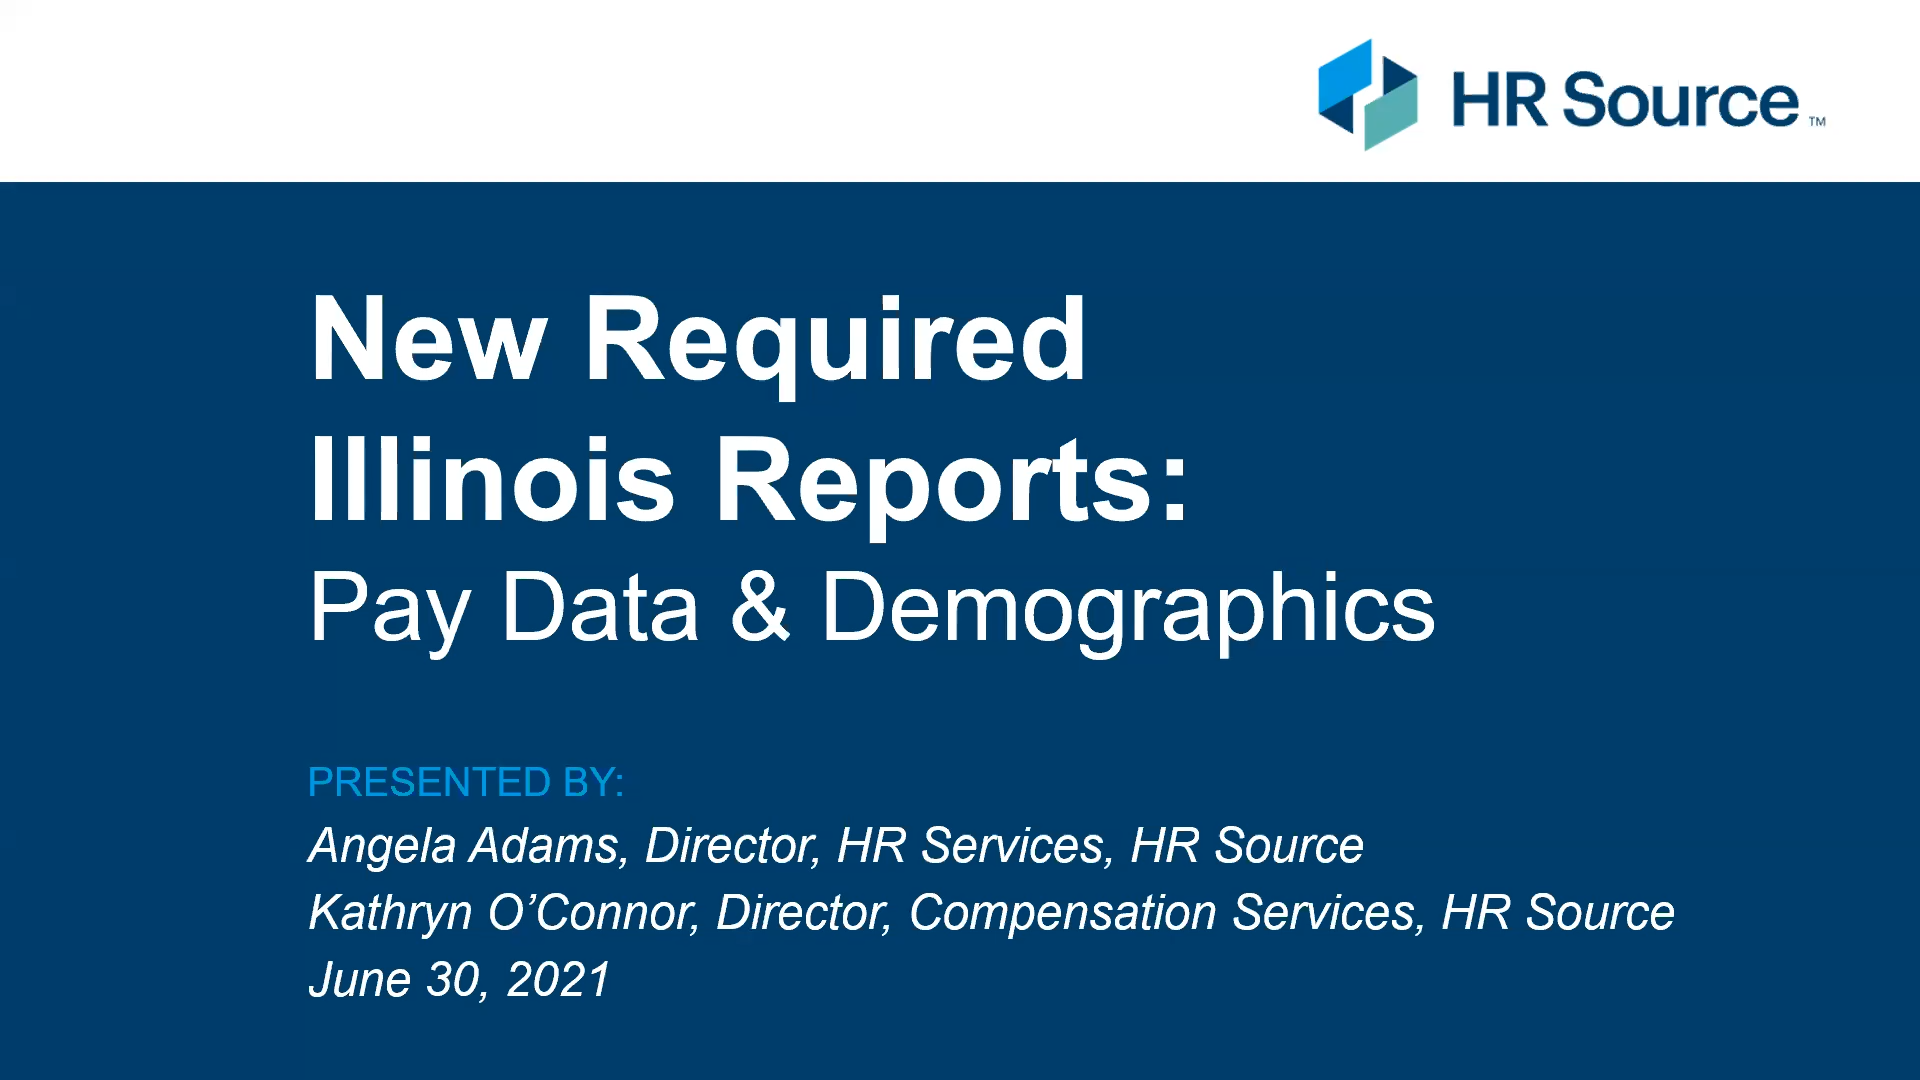 New Required Illinois Reports: Pay Data & Demographics